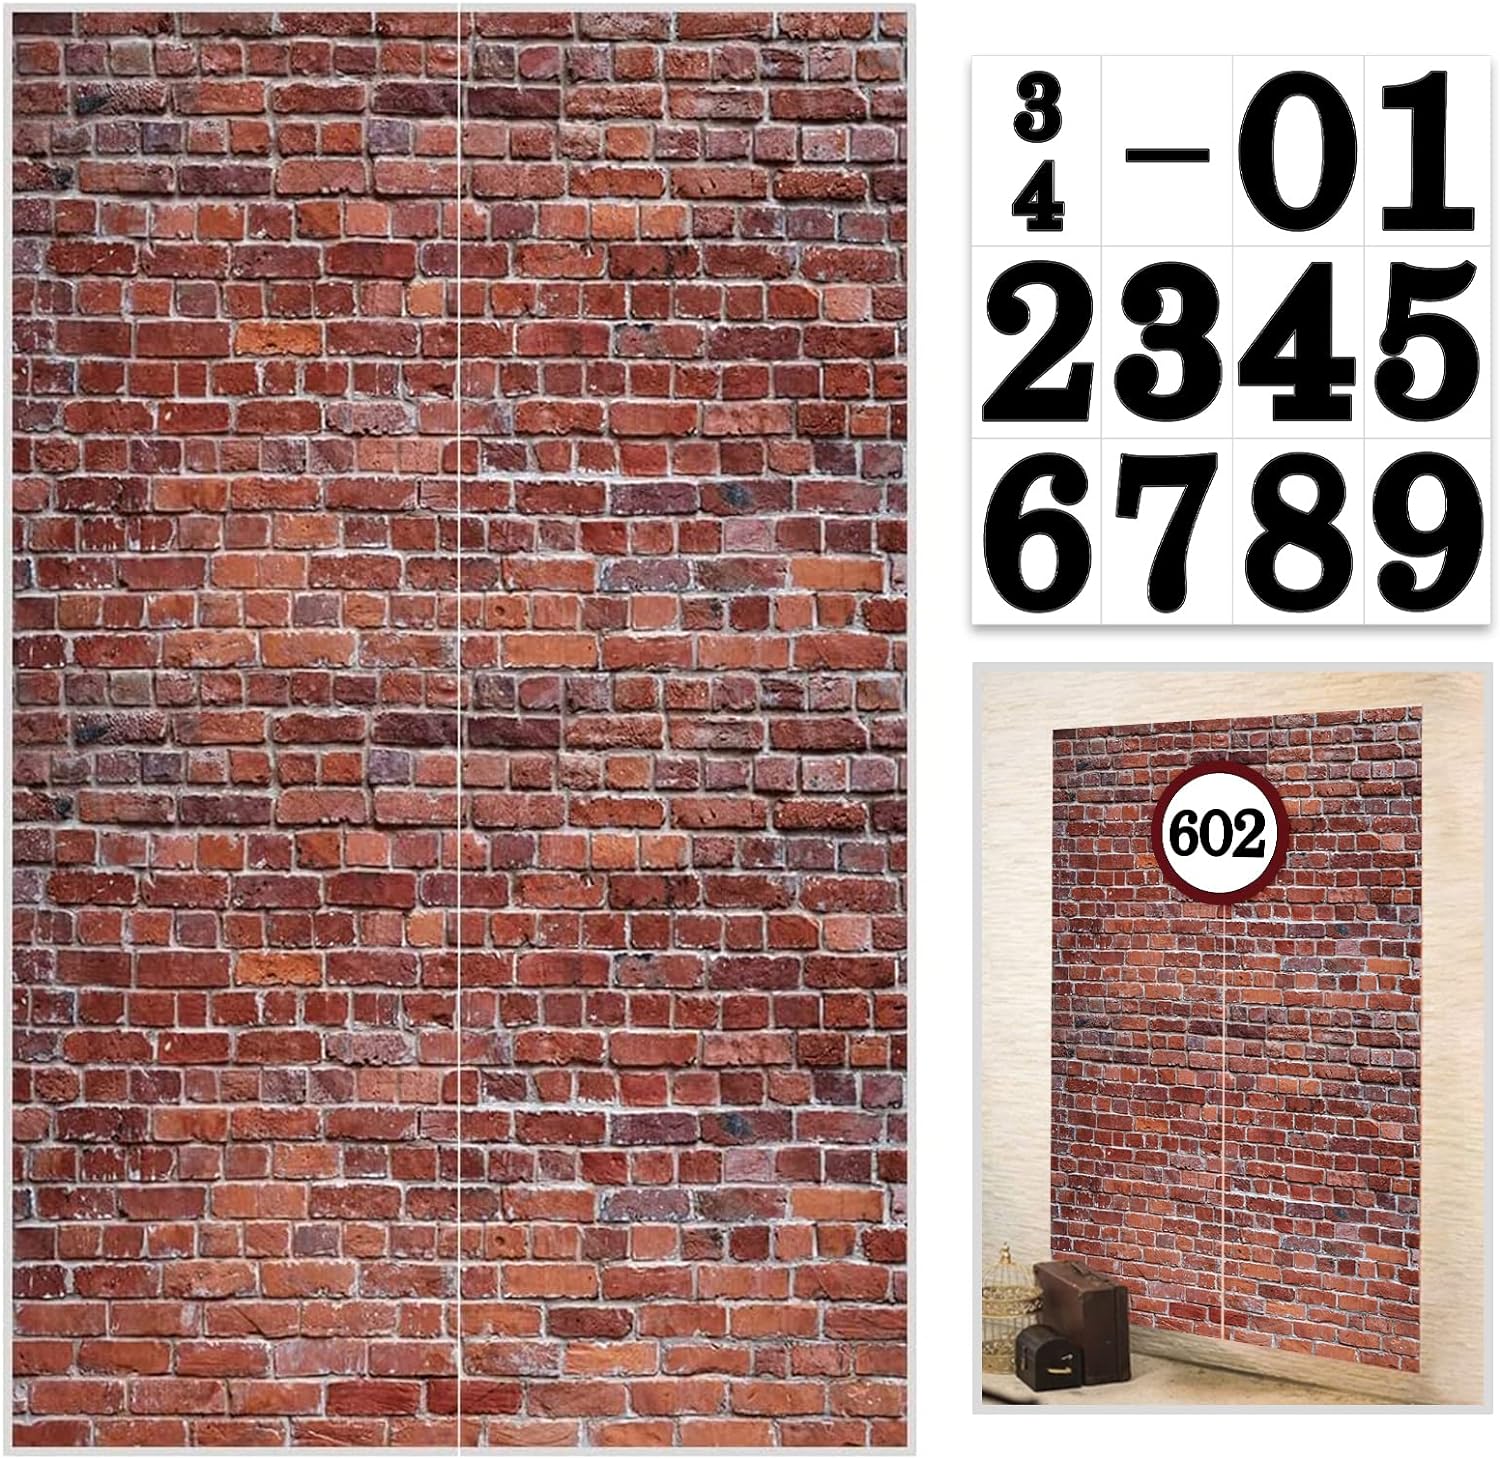 Bulk 78.7"x 49.2" Inches Classic Red Brick Wall Decor Christmas & Halloween Holiday Decoration Wholesale